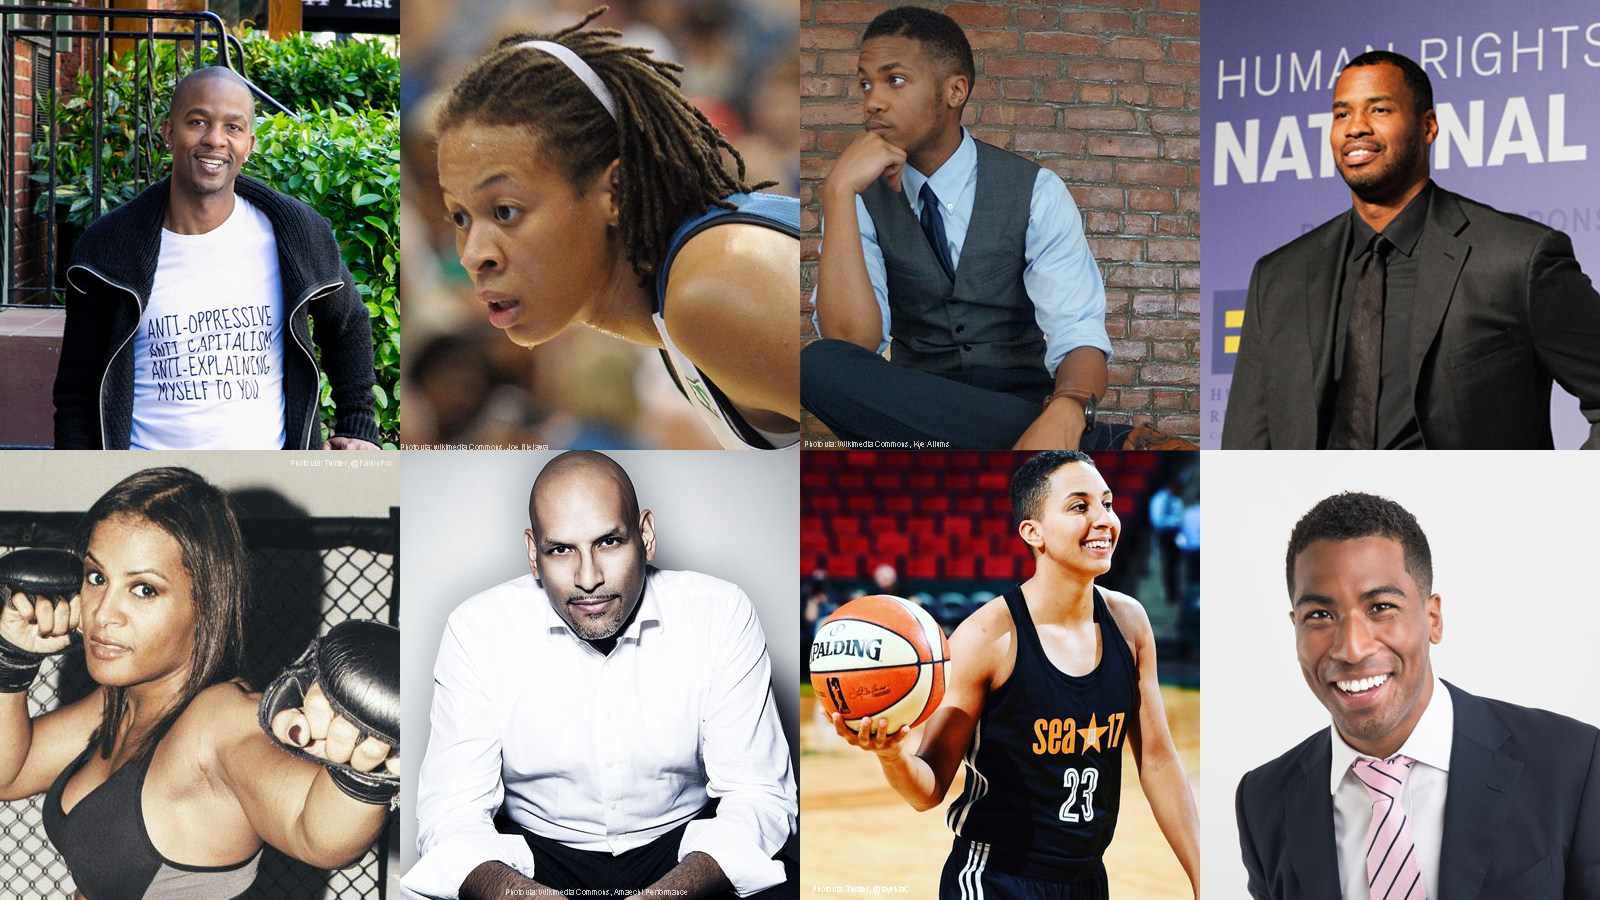 Meet Black Athletes Paving the Way for LGBTQ Equality | Human Rights ...